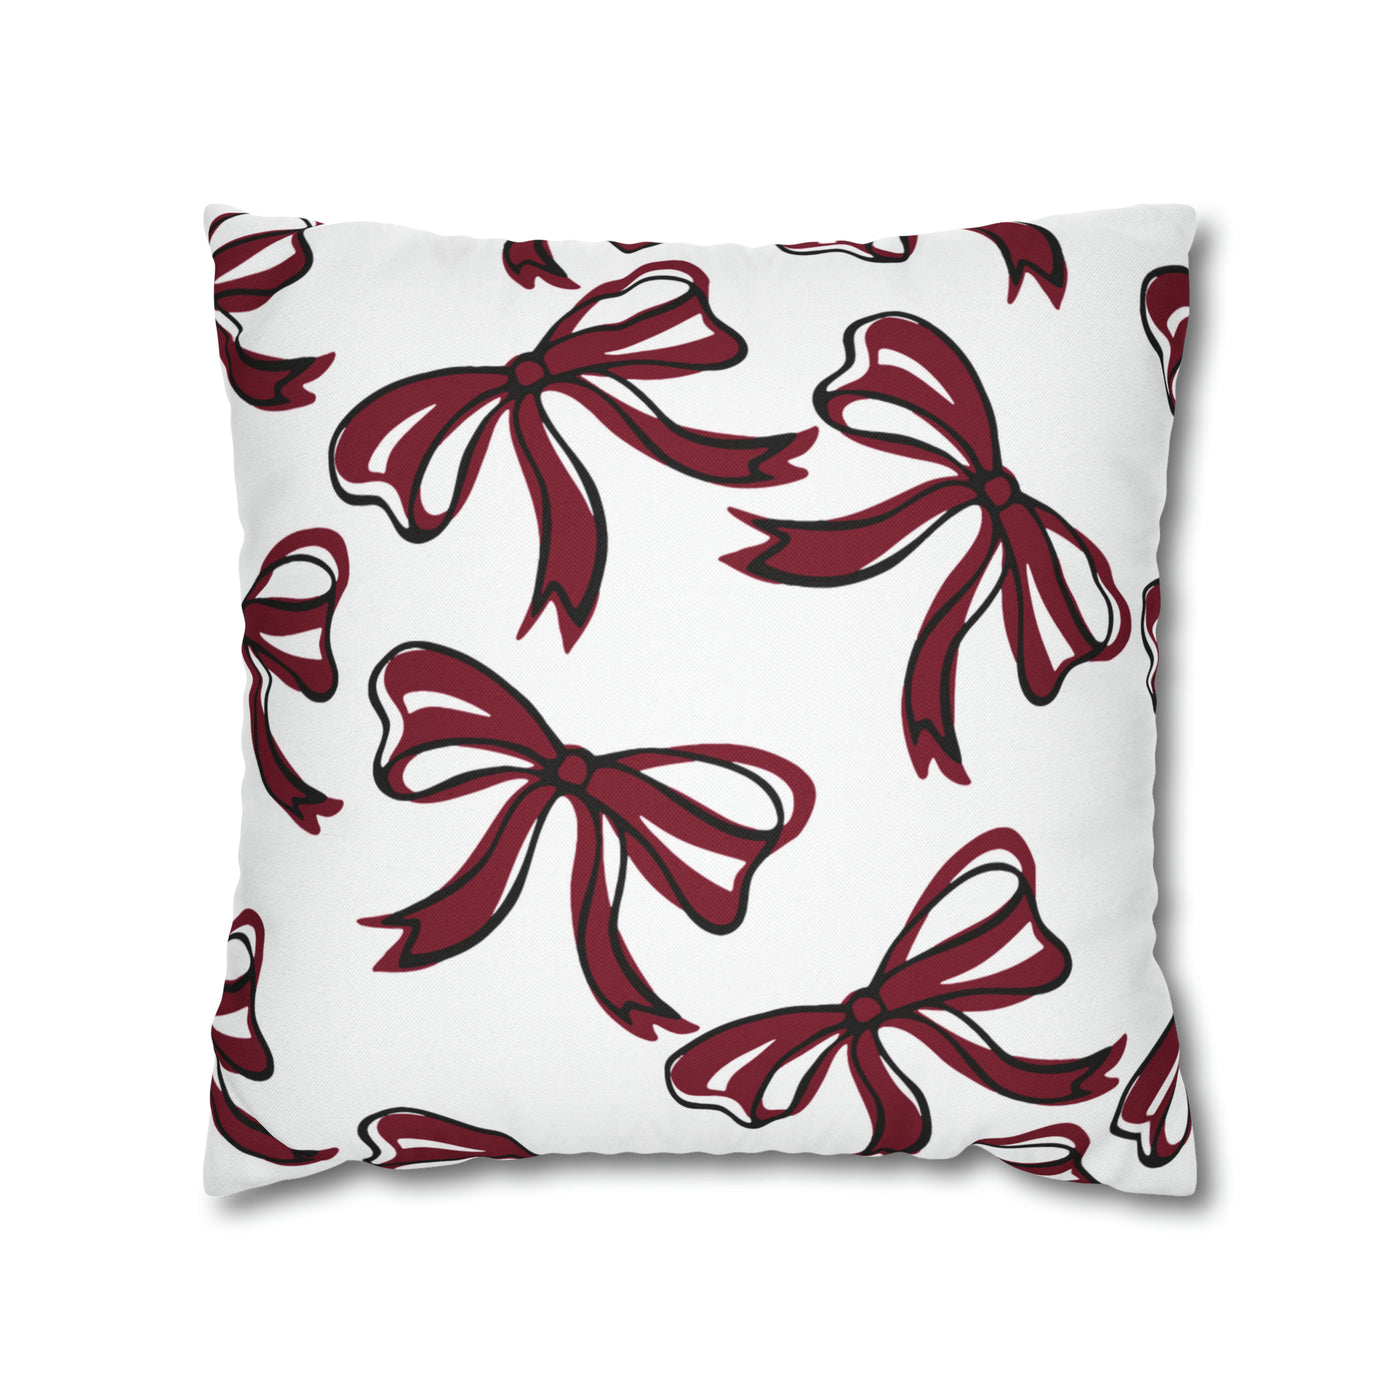 Trendy Bow College Pillow Cover - Dorm Pillow, Graduation Gift,Bed Party Gift,Acceptance Gift,College Gift, South Carolina, Gamecocks, USC